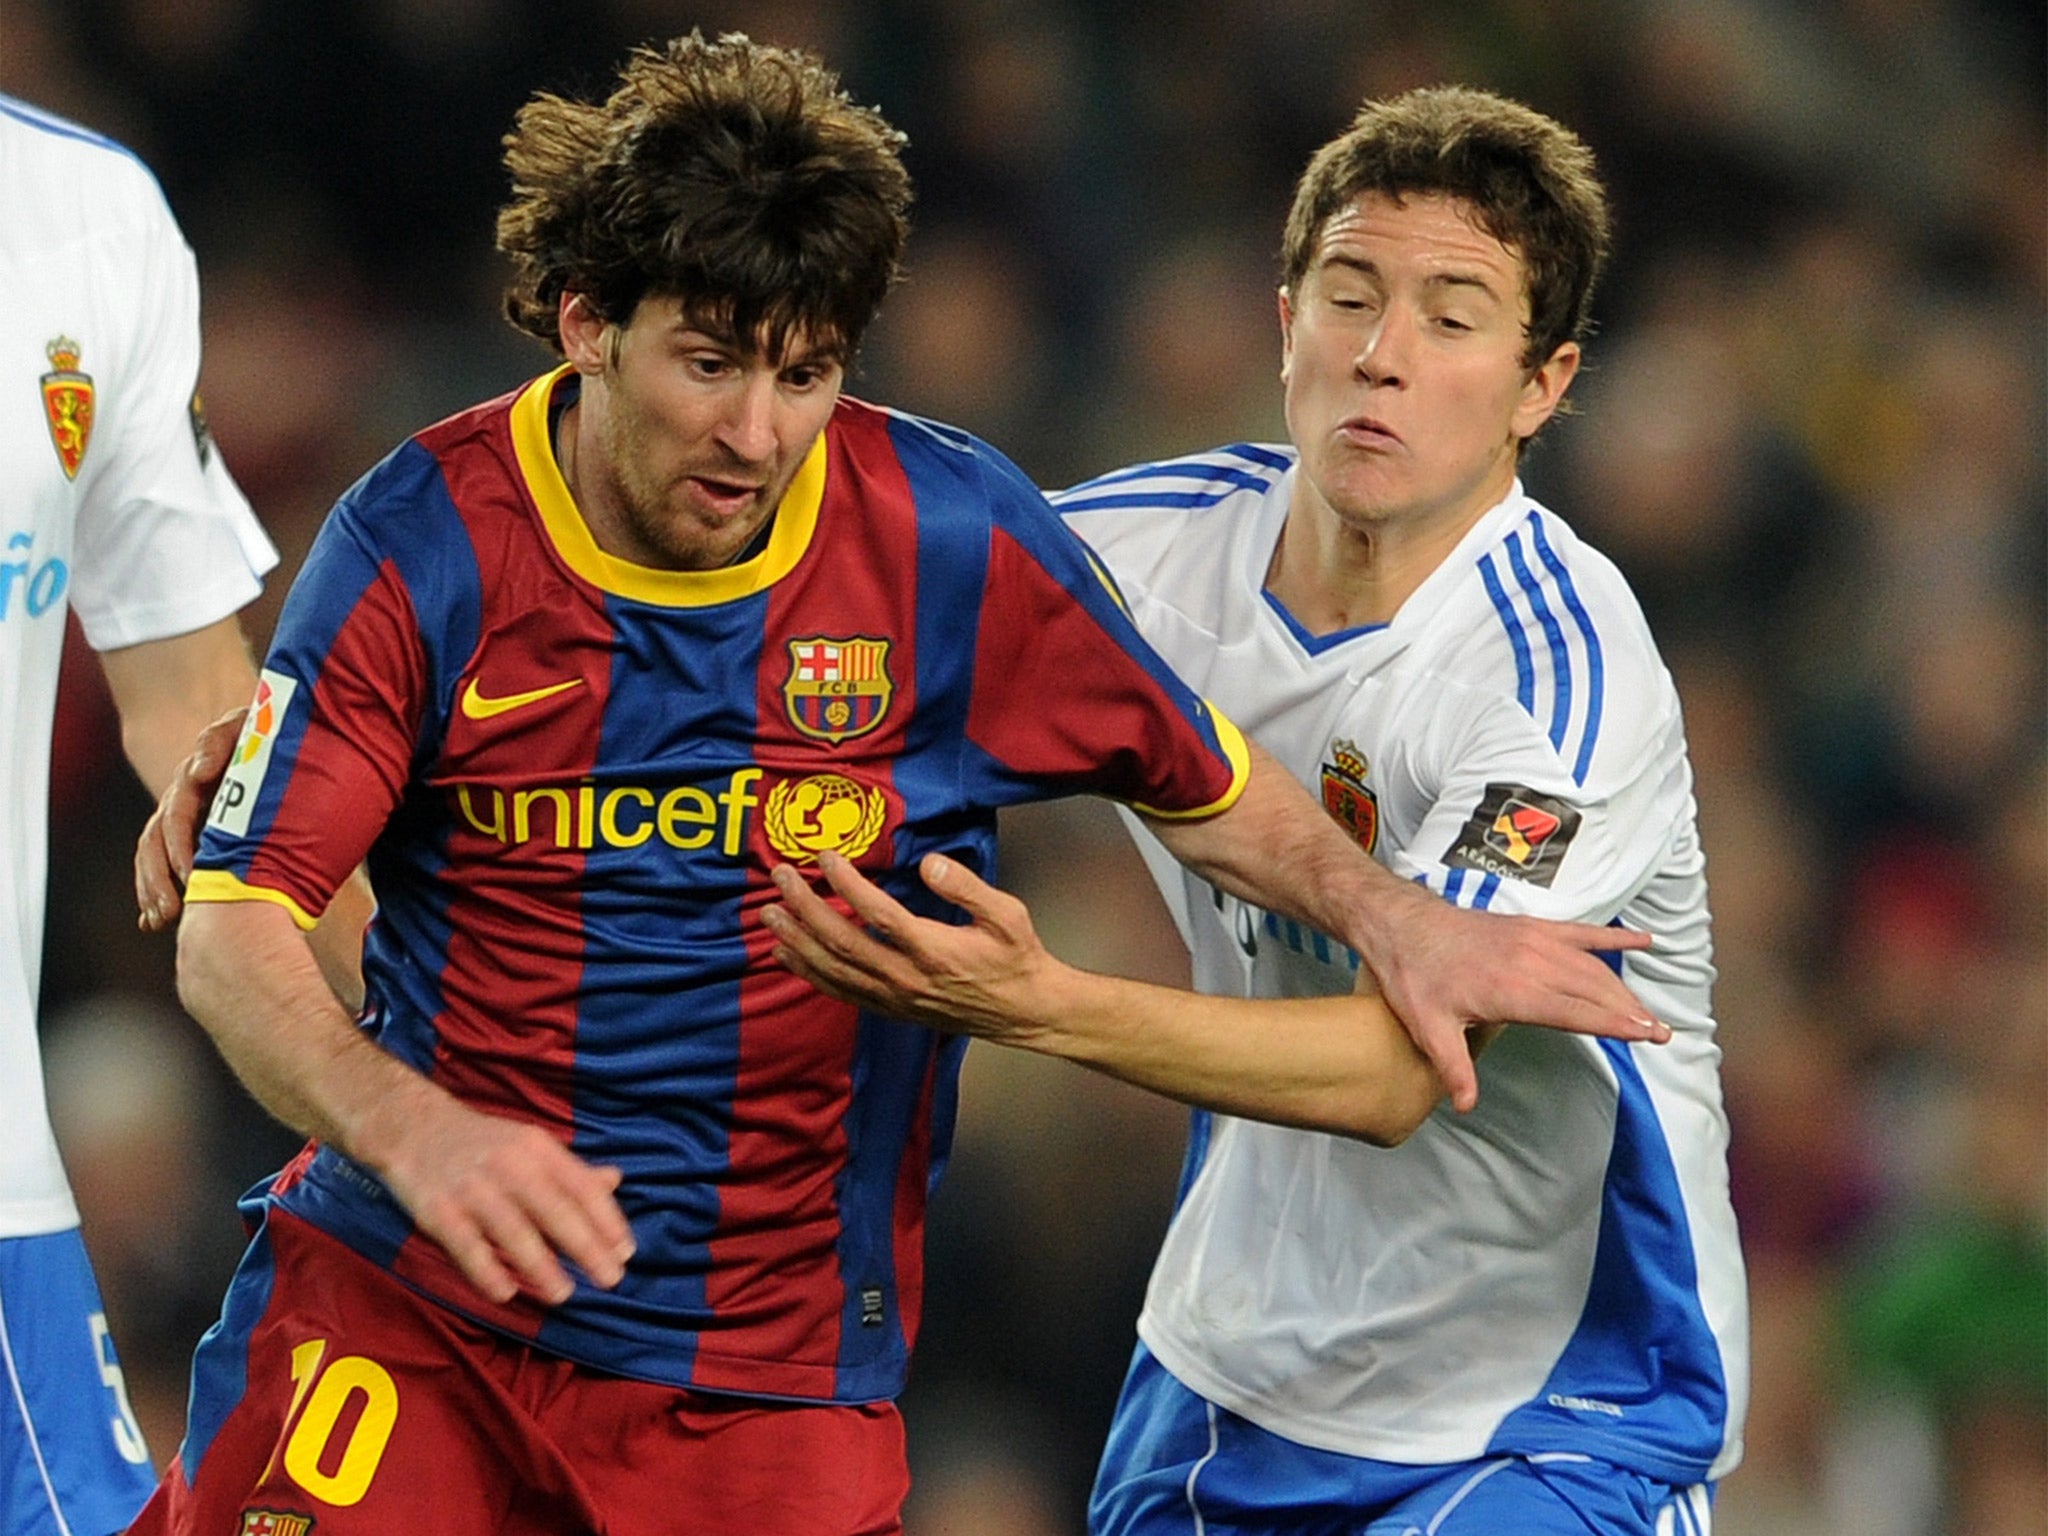 Ander Hererra (right) takes on Lionel Messi during his time at Real Zaragoza